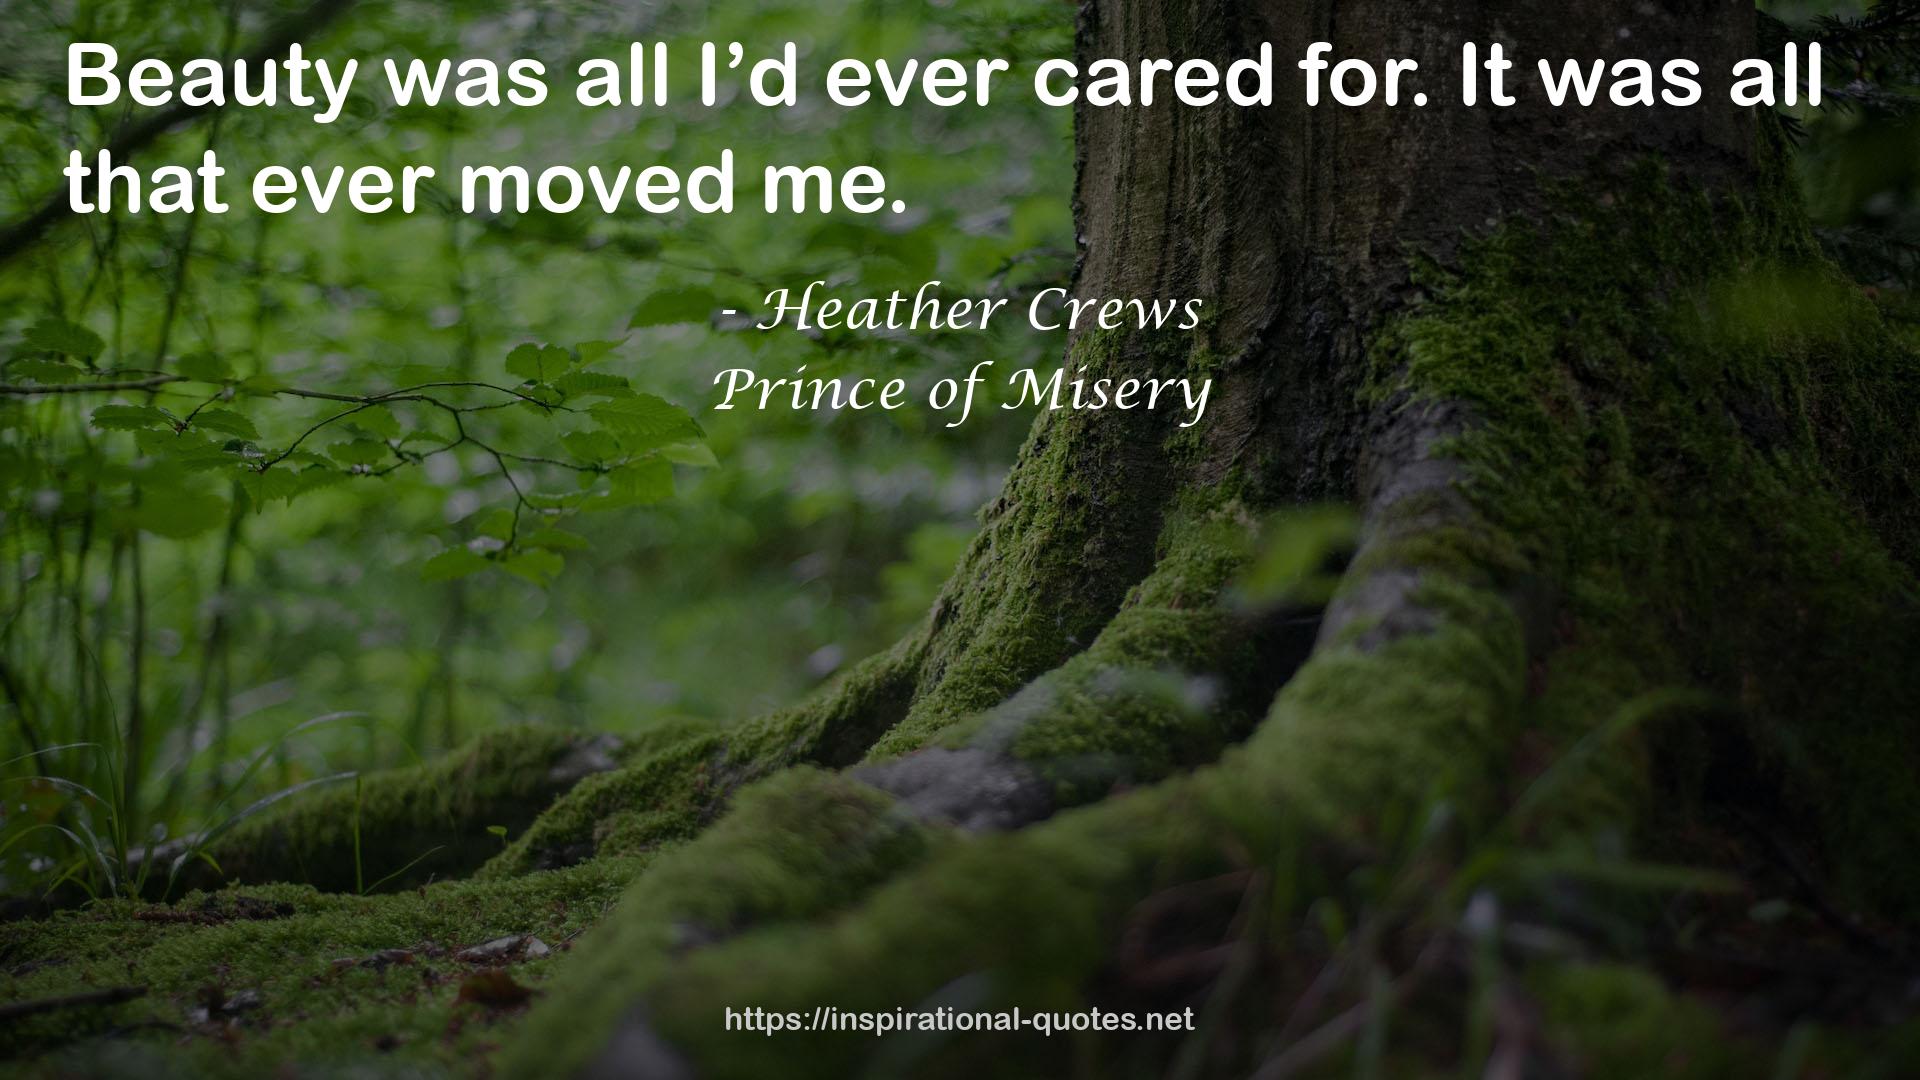 Prince of Misery QUOTES